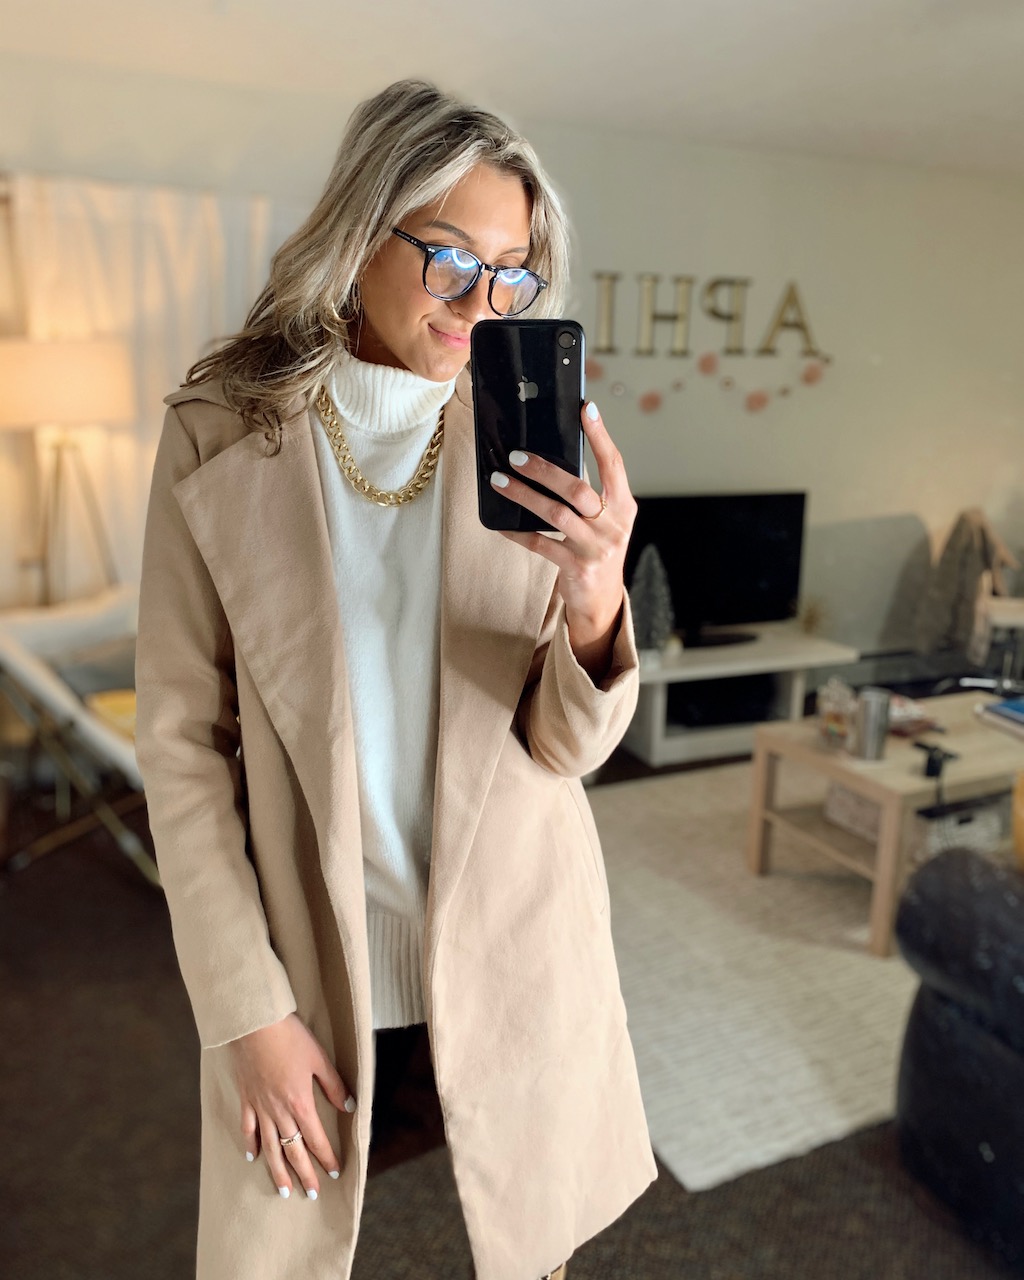 weekly wrap up #49 2020 (week in my life + outfits of the week)